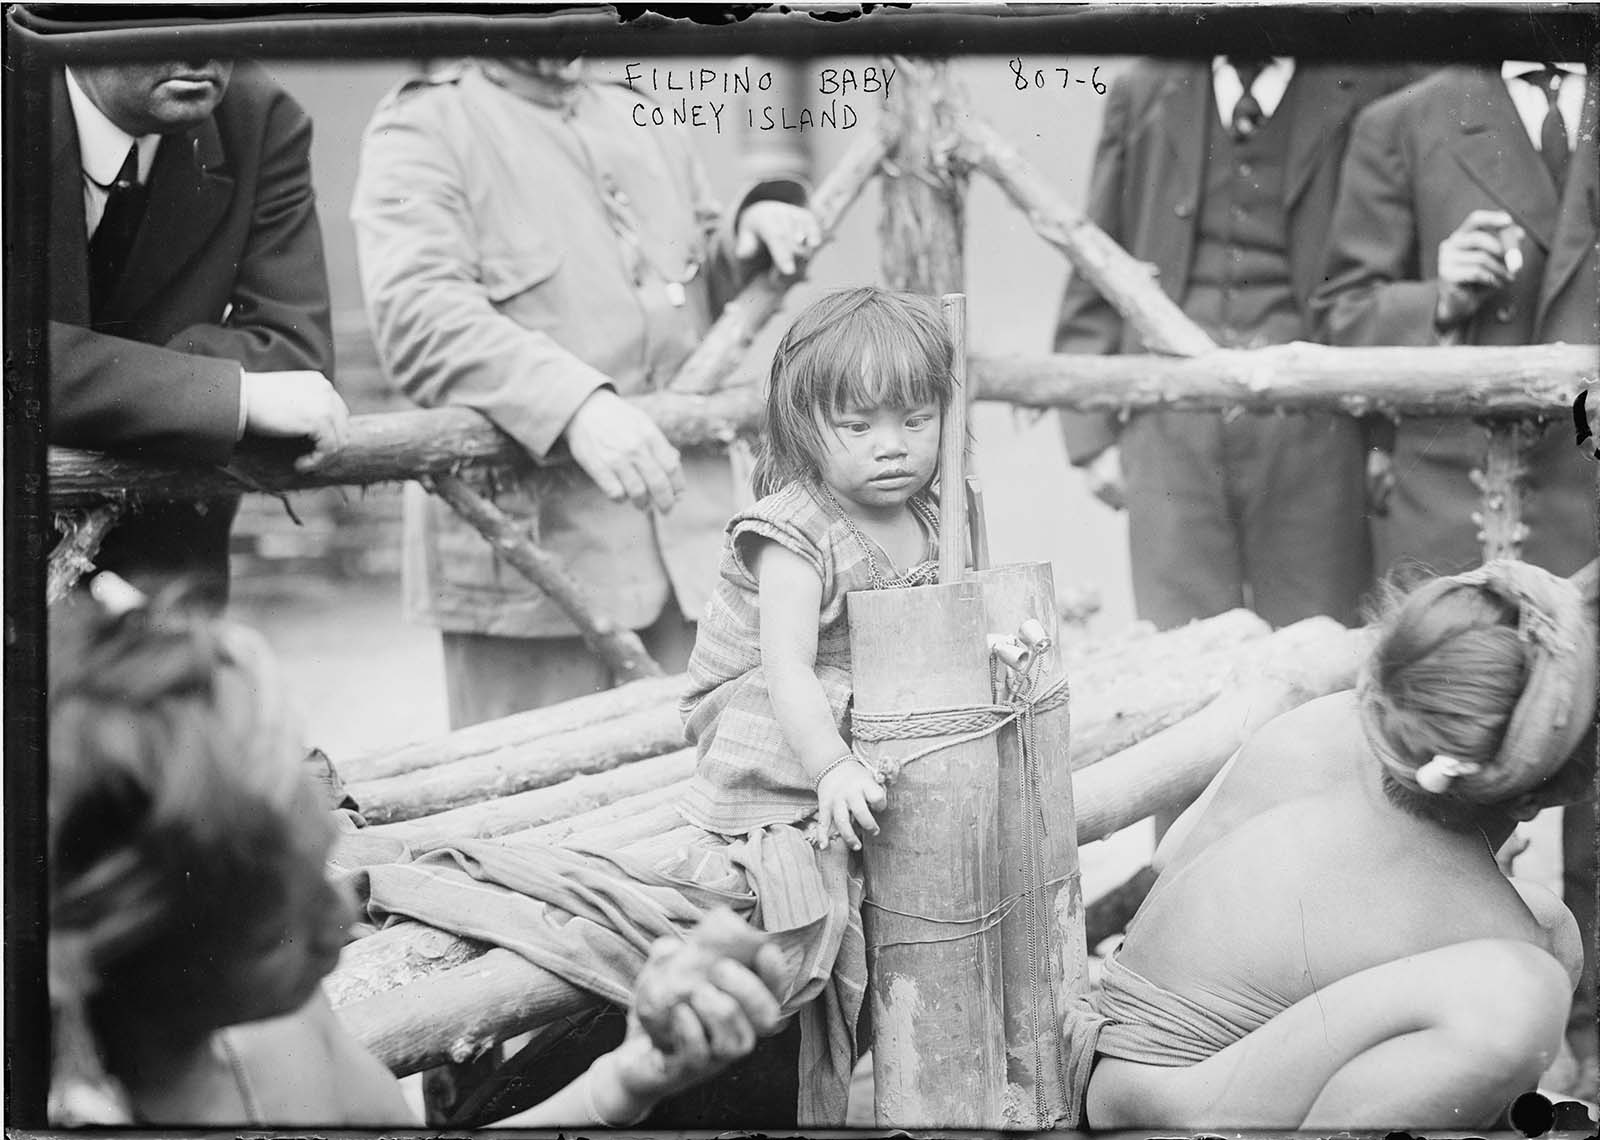 A young Filipino girl sitting on a wooden bench in an enclosure in Coney Island, New York in another horrifying 1906 ‘exhibit’.